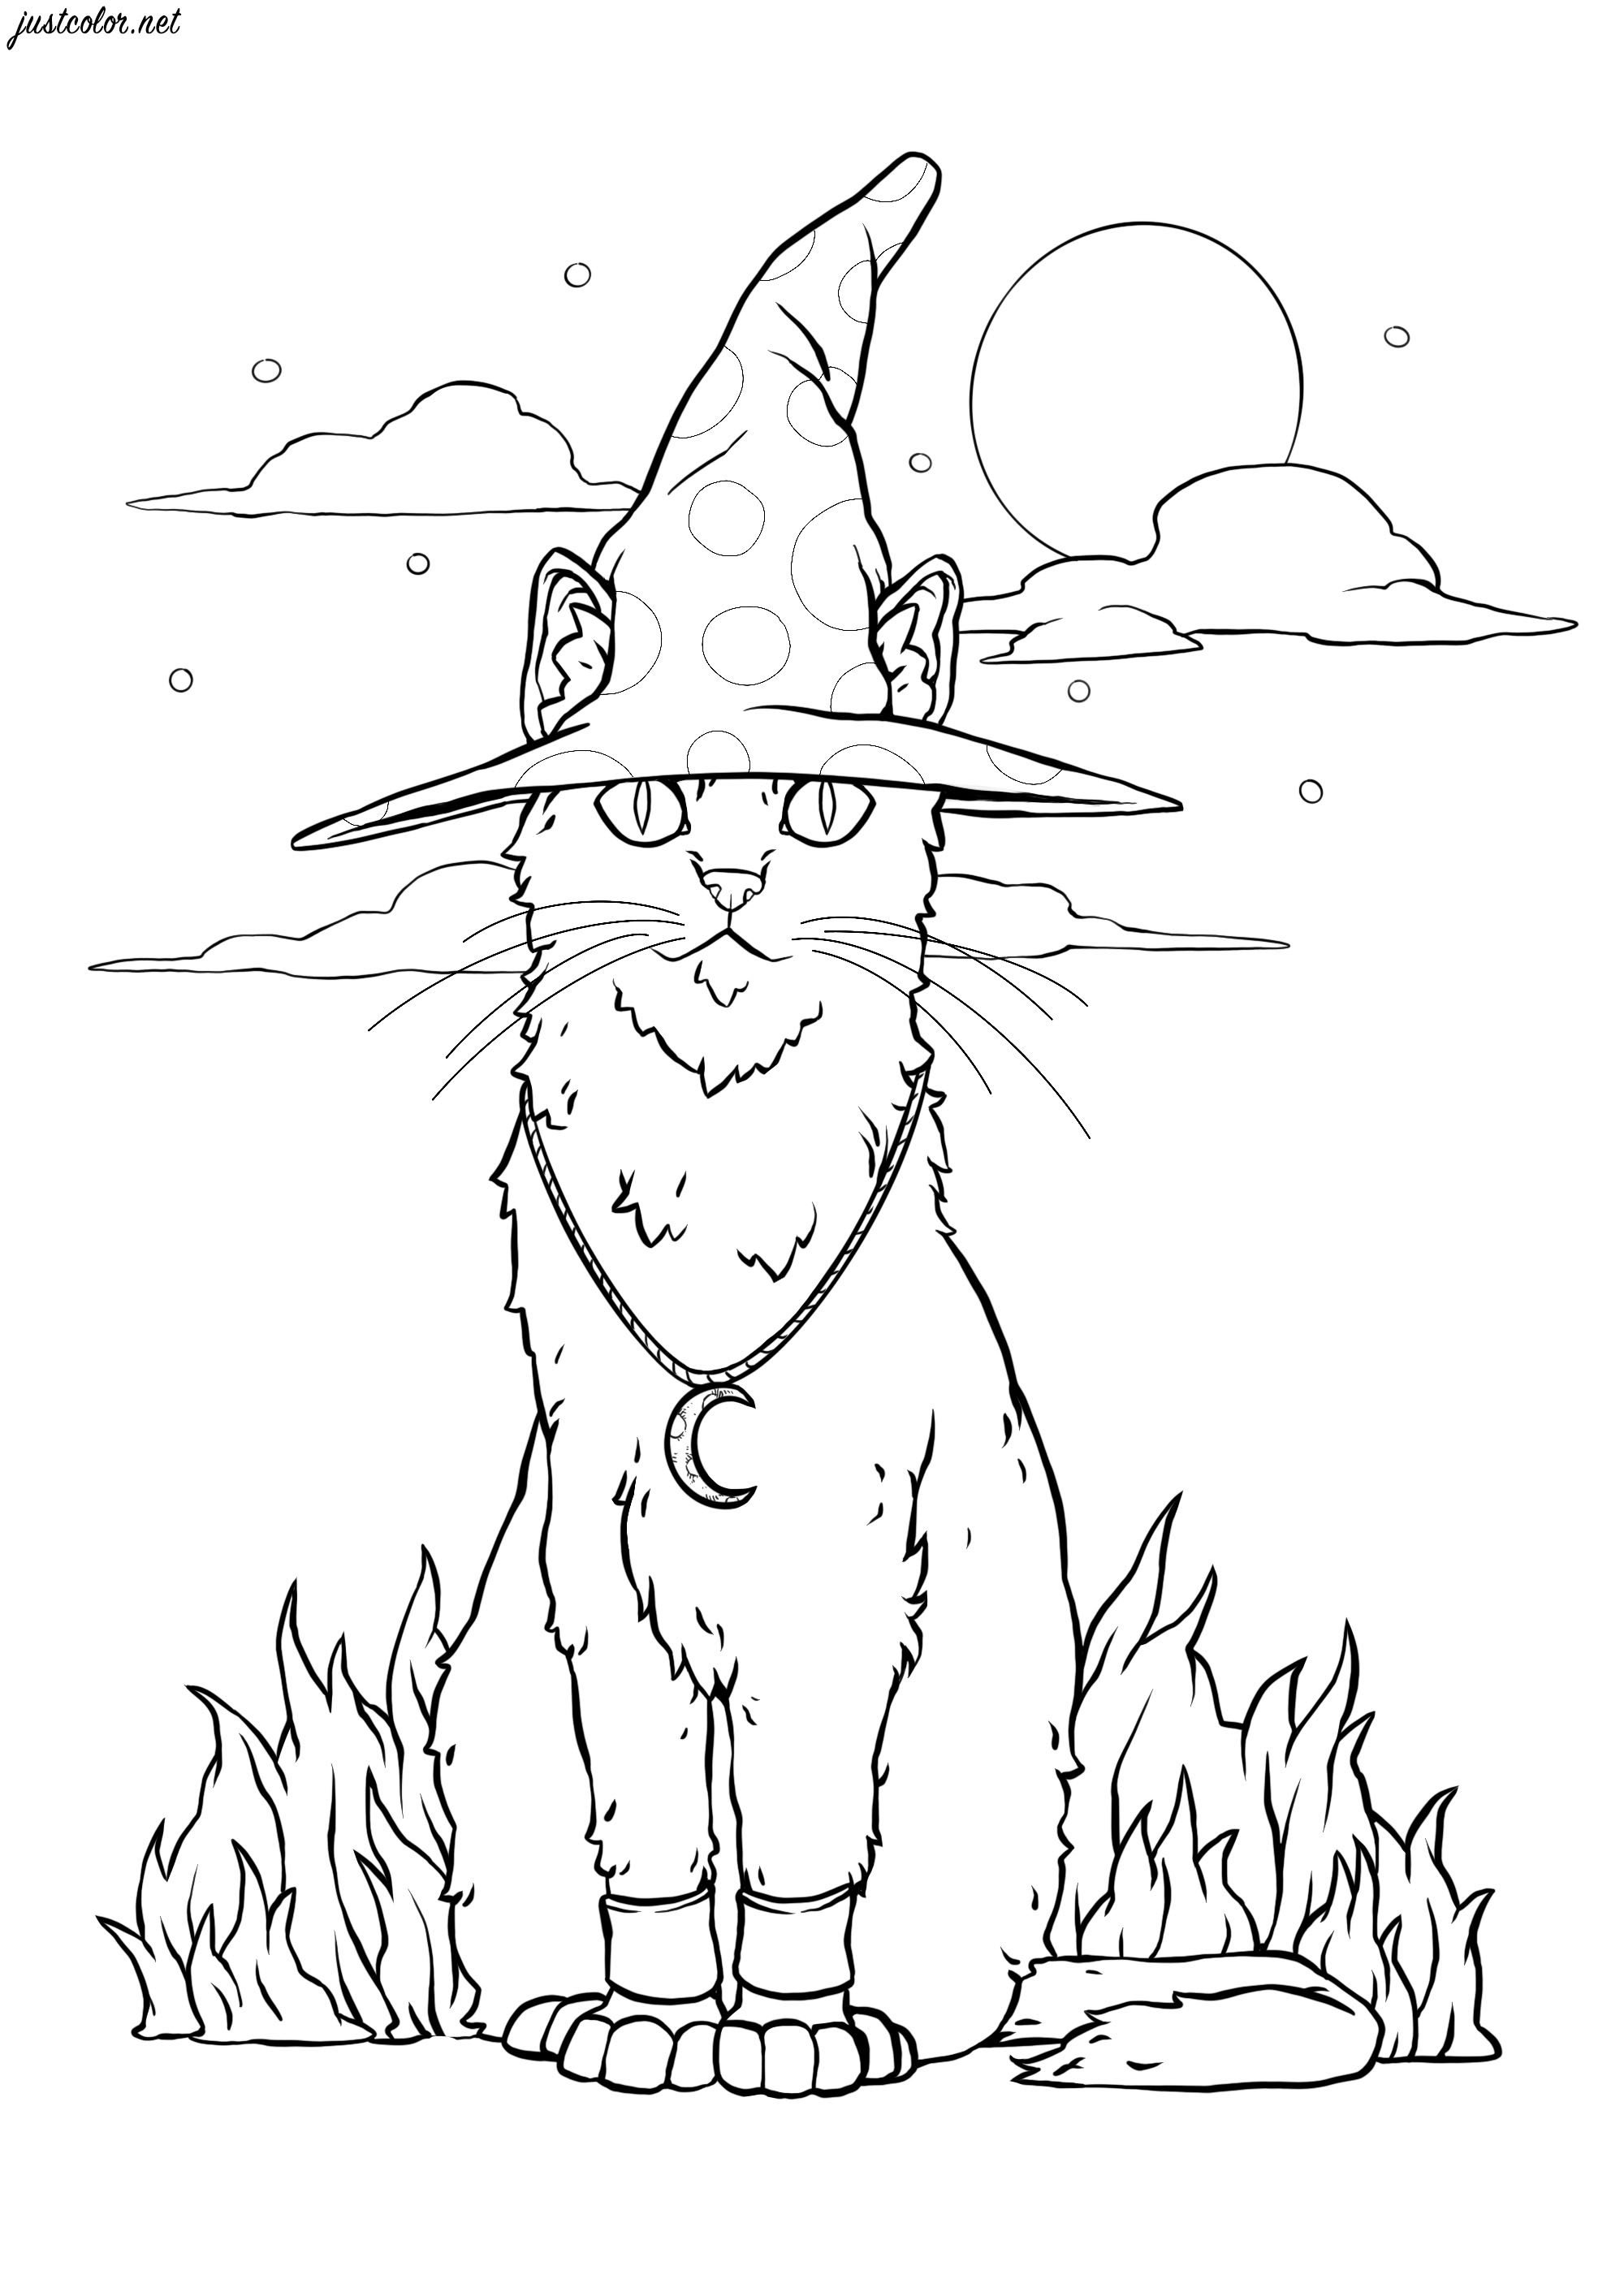 Halloween to download for free - Halloween Kids Coloring Pages